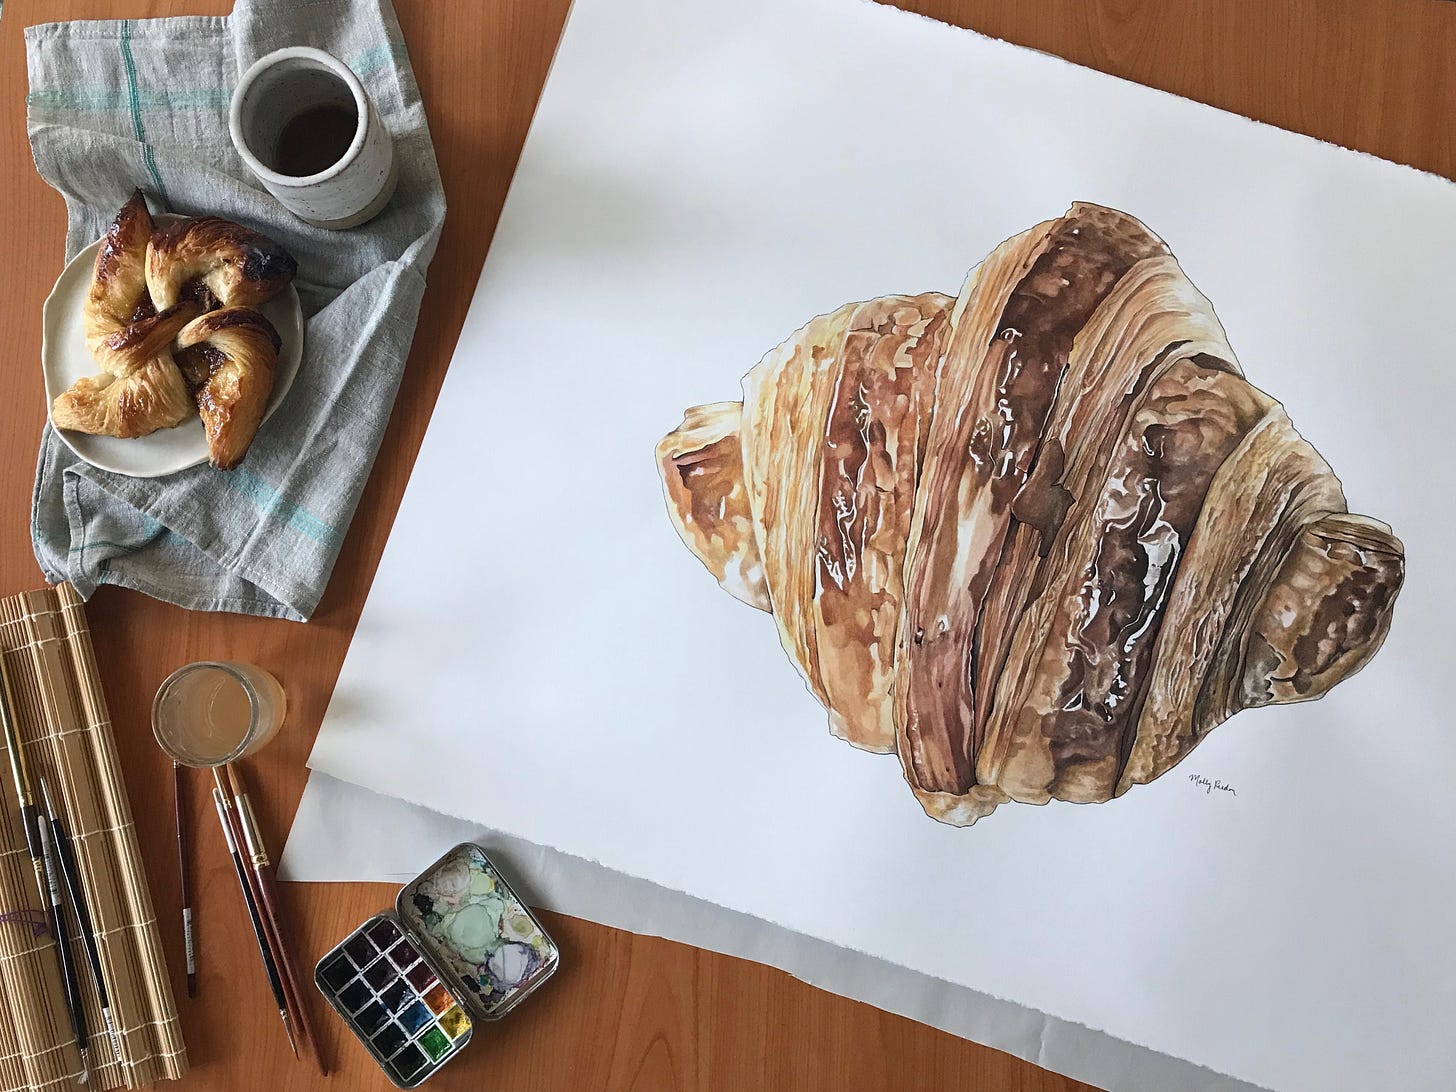 Birds eye view of the painting on a desk surface with a croissant pastry to the left of it, a cup of coffee, and painting supplies